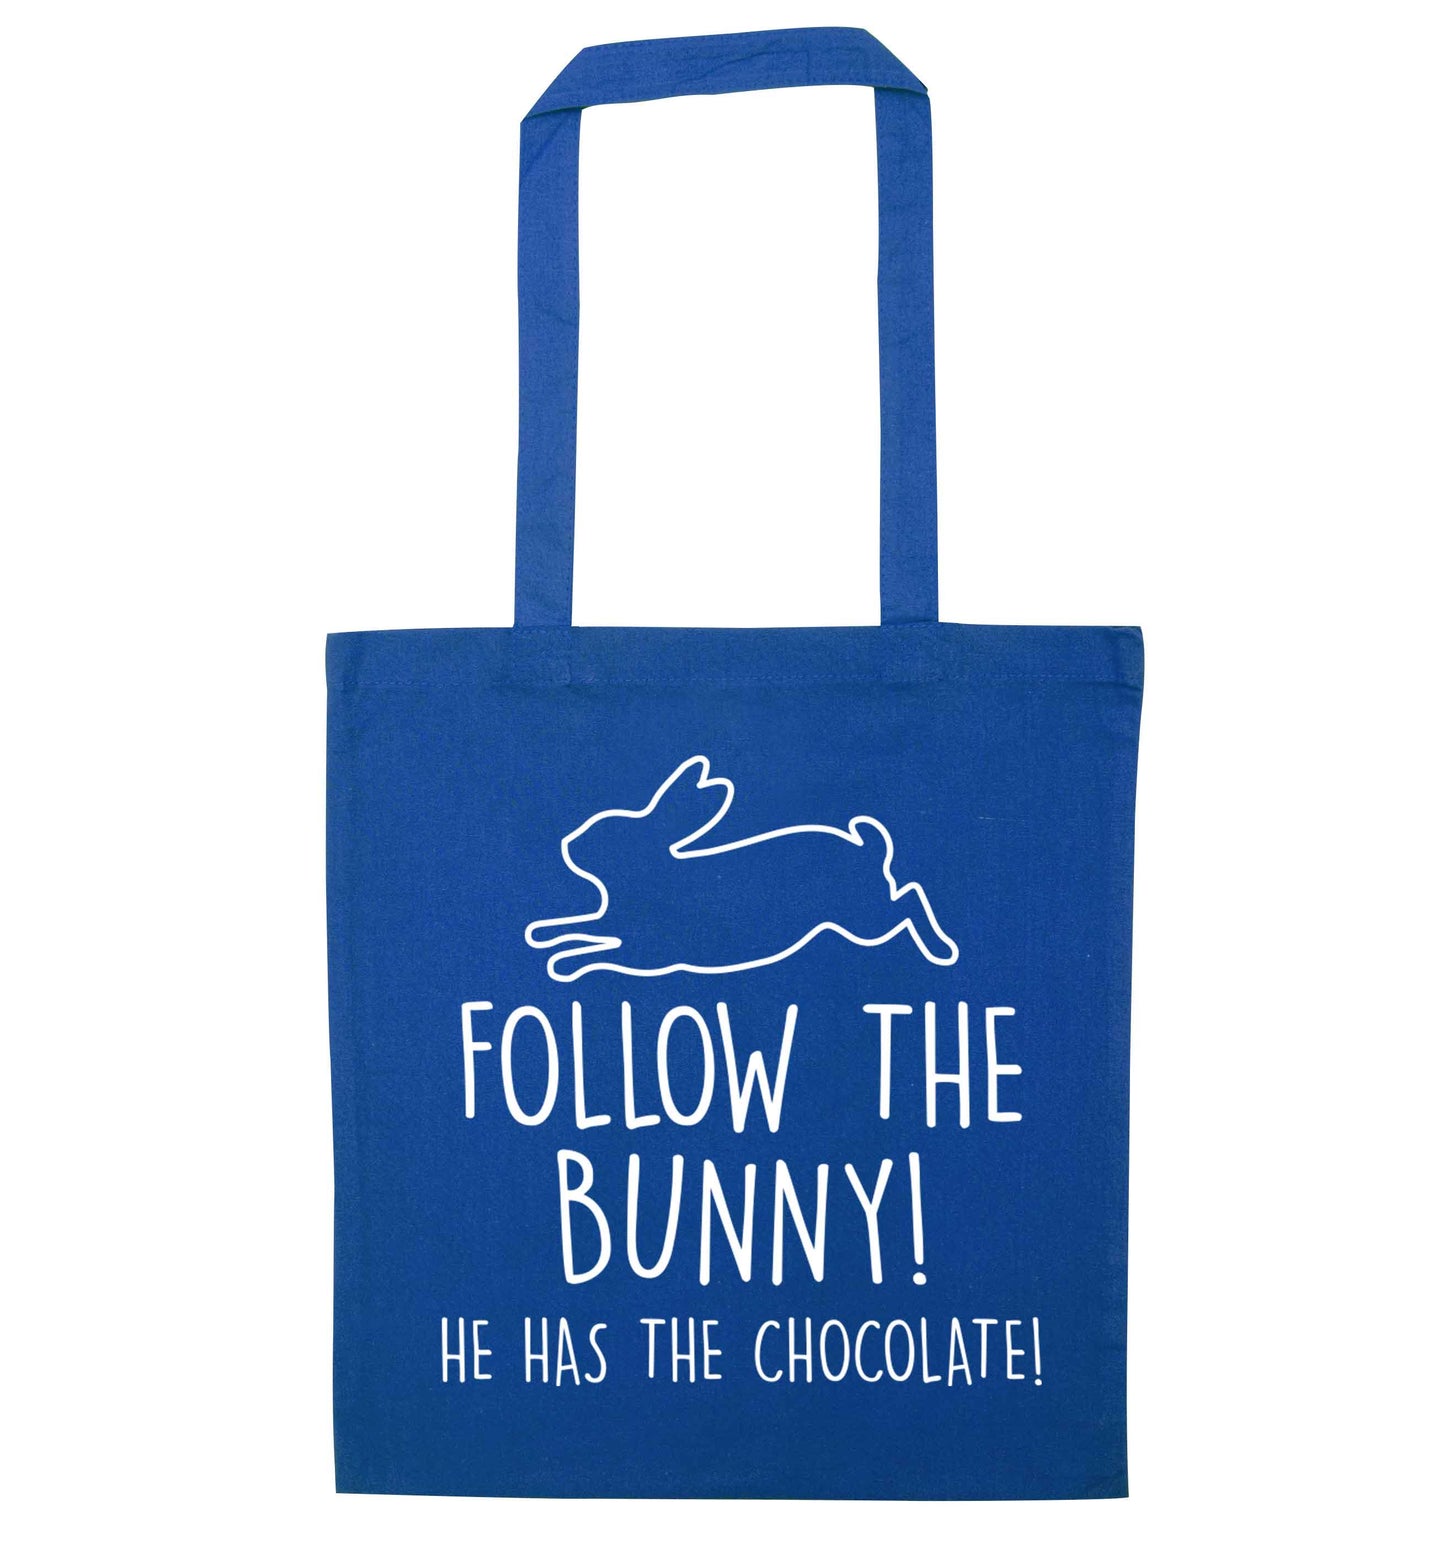 Follow the bunny! He has the chocolate blue tote bag